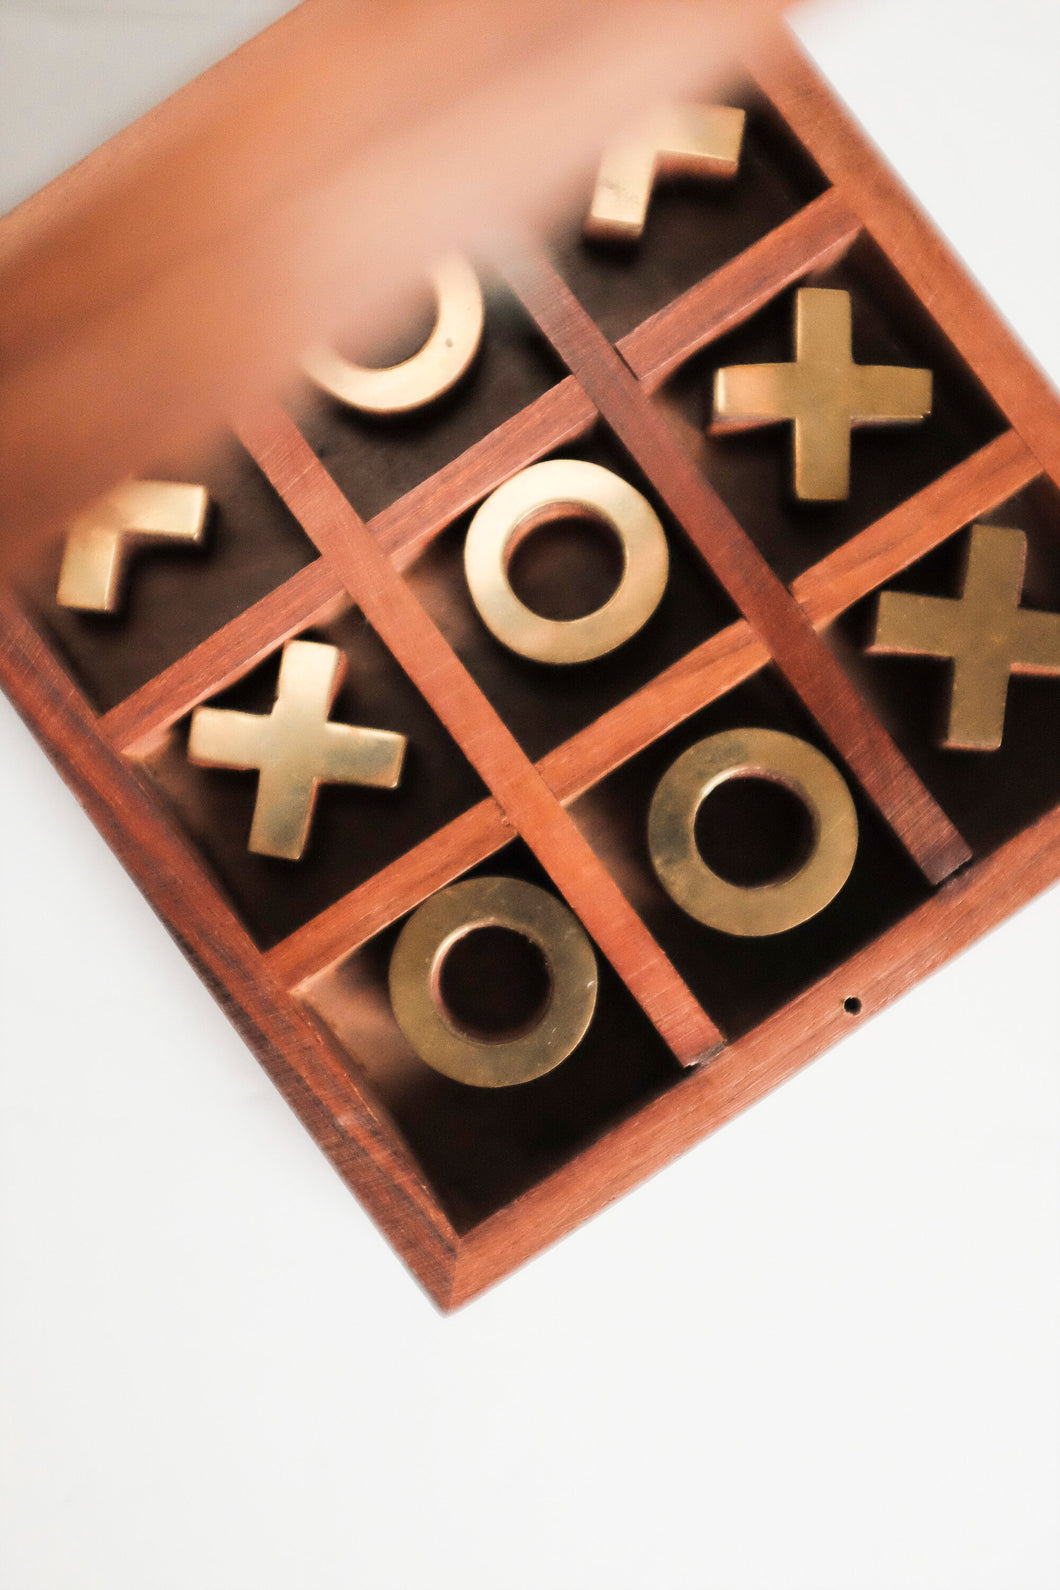 Wooden Tic-Tac-Toe Game